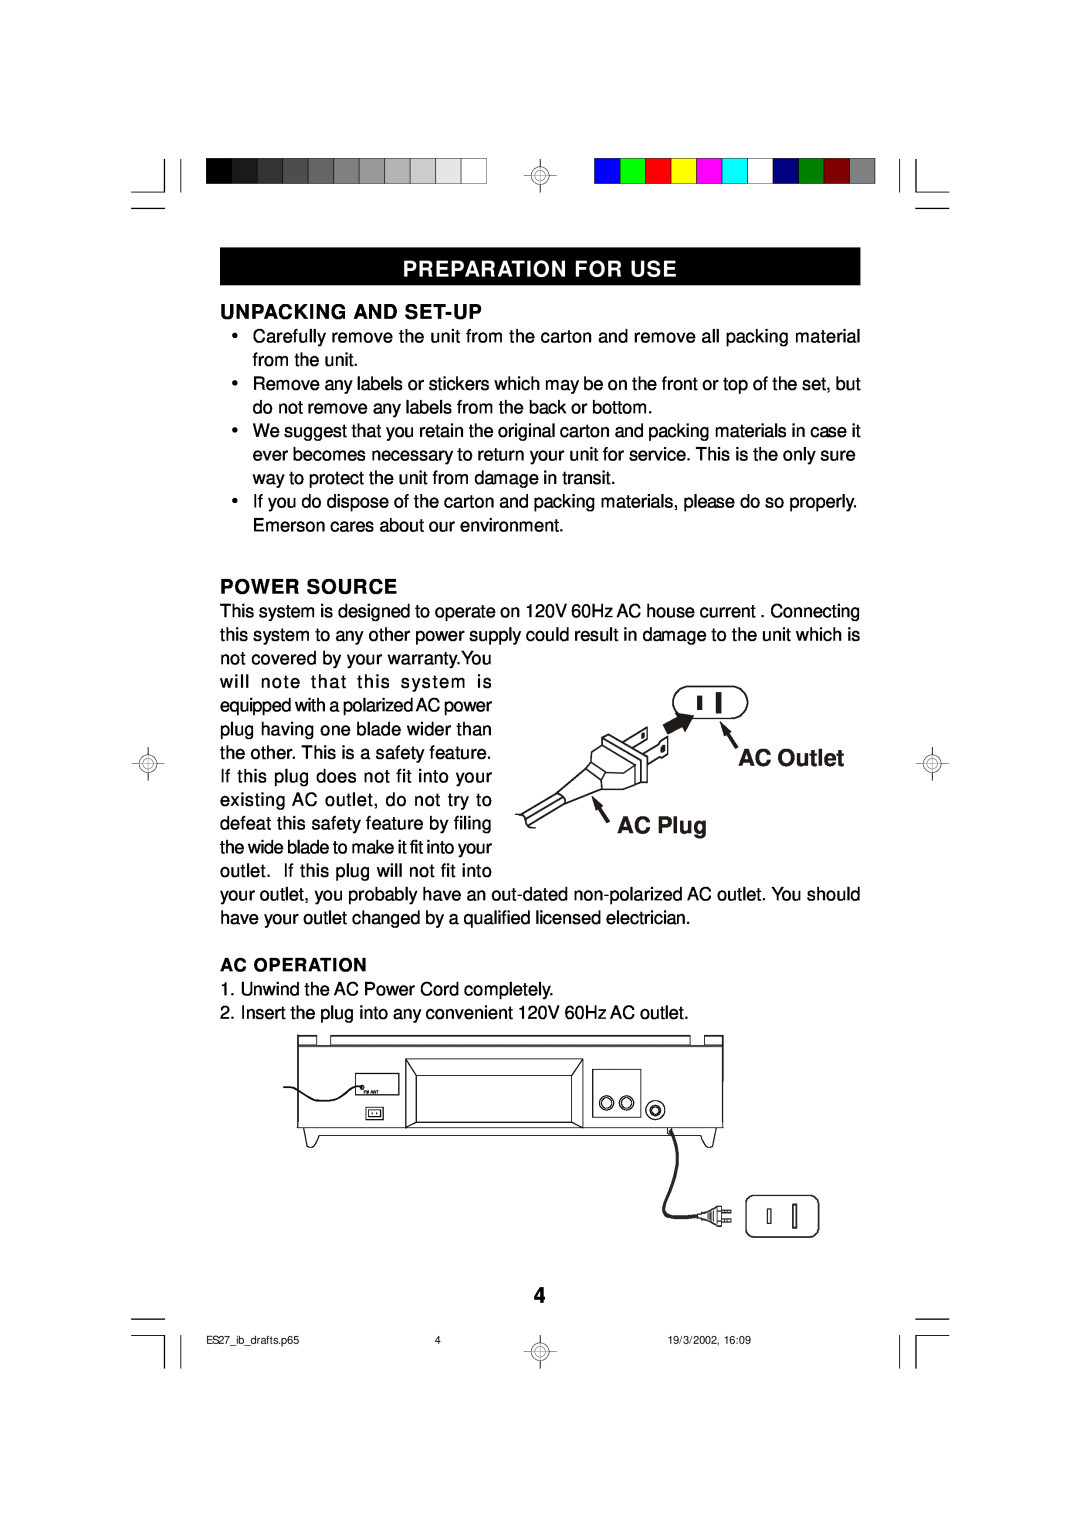 Emerson ES27 owner manual Preparation For Use, Unpacking And Set-Up, Power Source, Ac Operation 